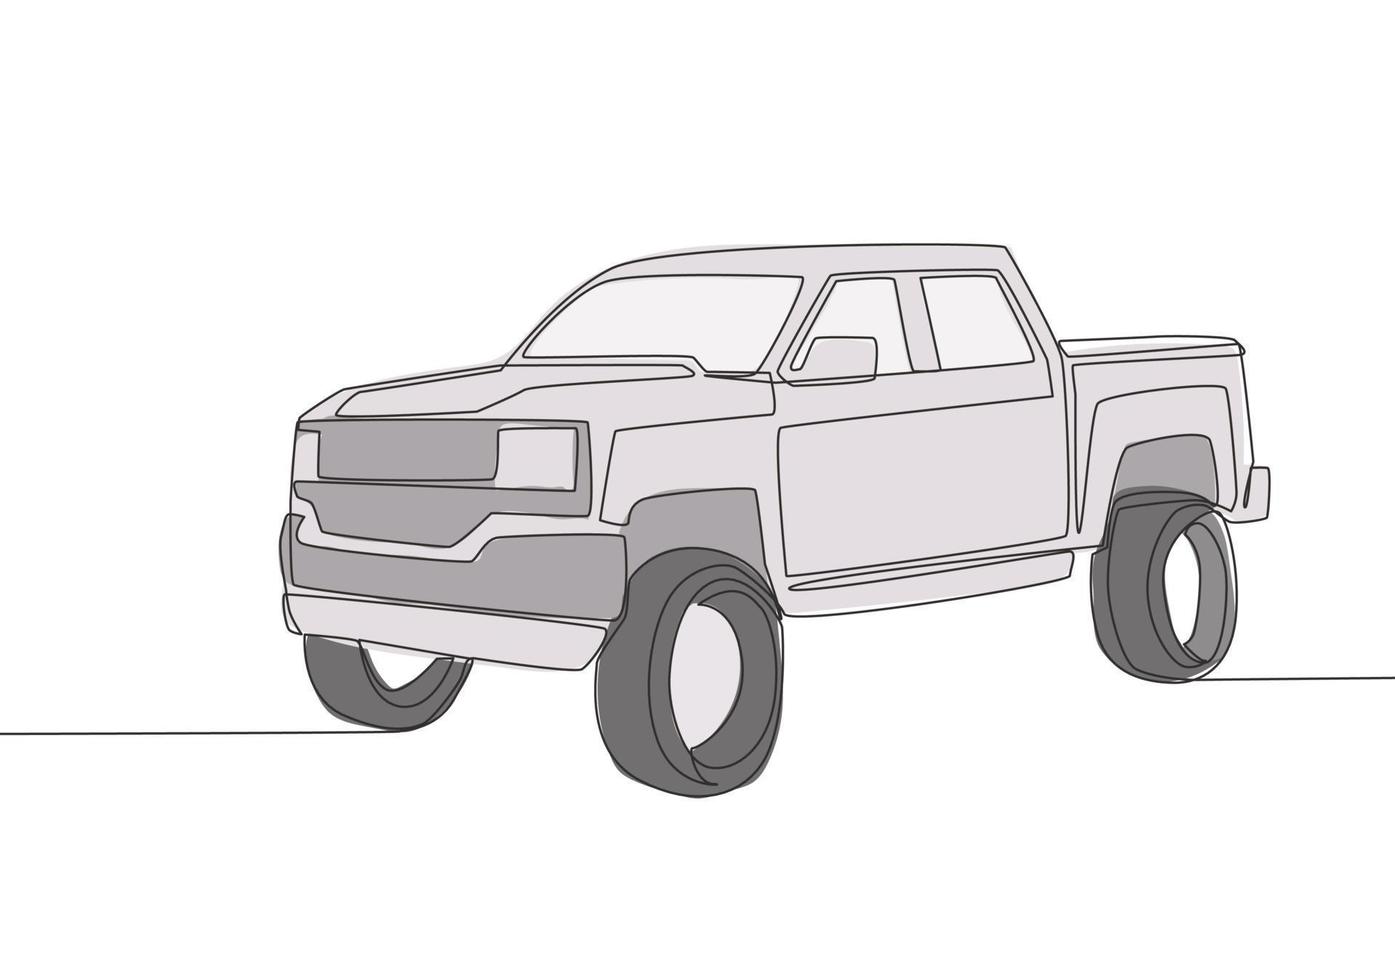 Single line drawing of tough pickup truck car. Cargo logistics carrier vehicle transportation concept. One continuous line draw design vector